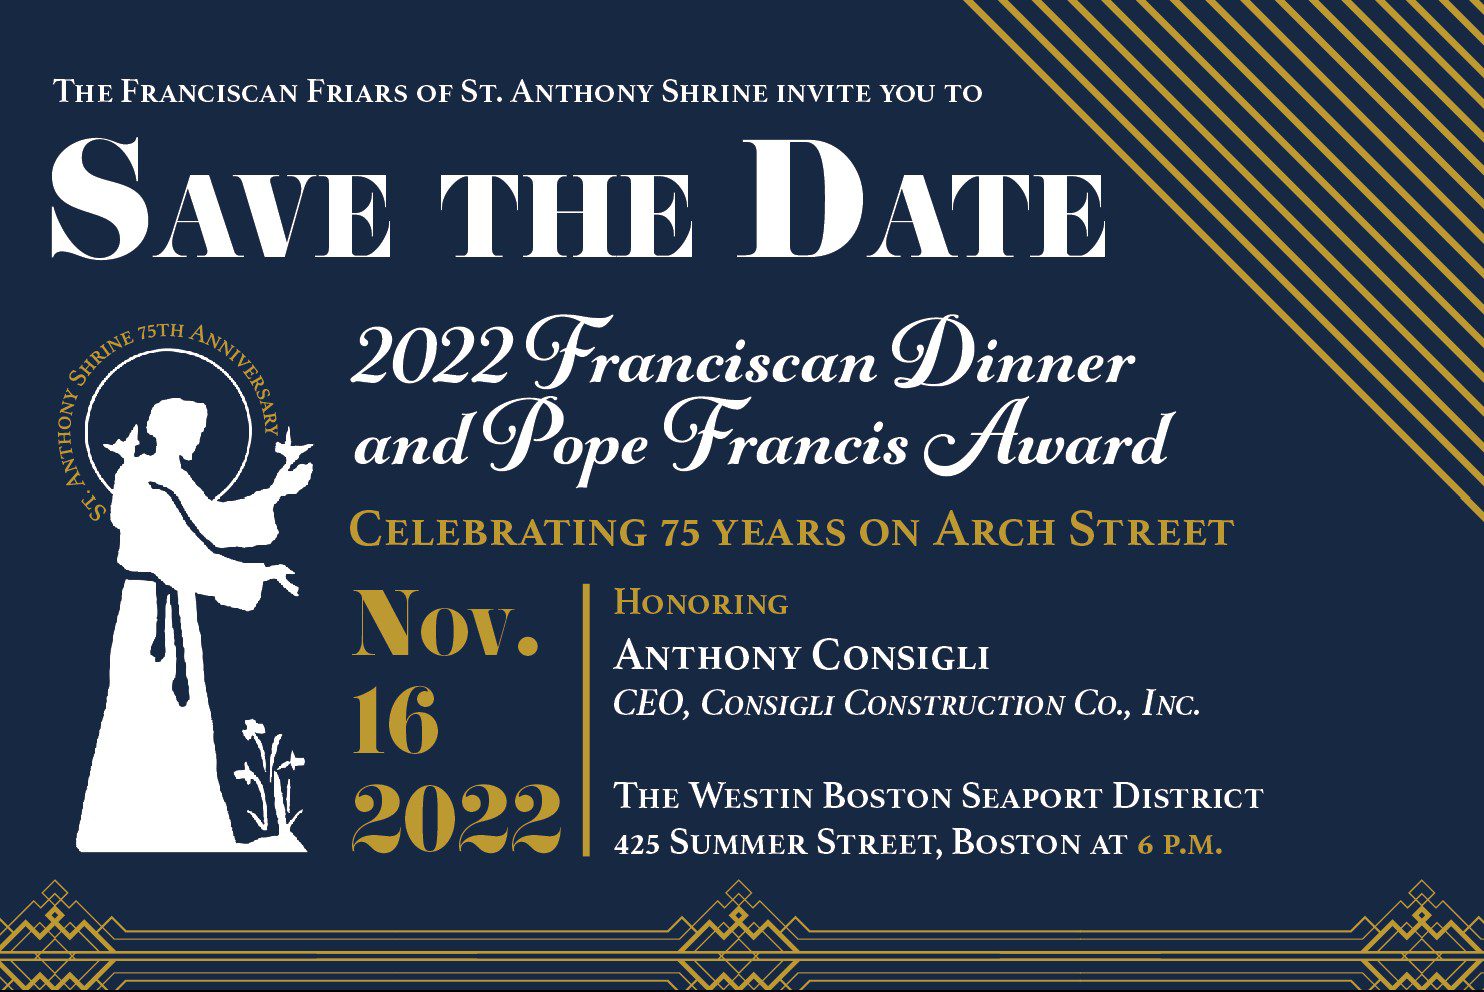 2022 Franciscan Dinner and Pope Francis Award